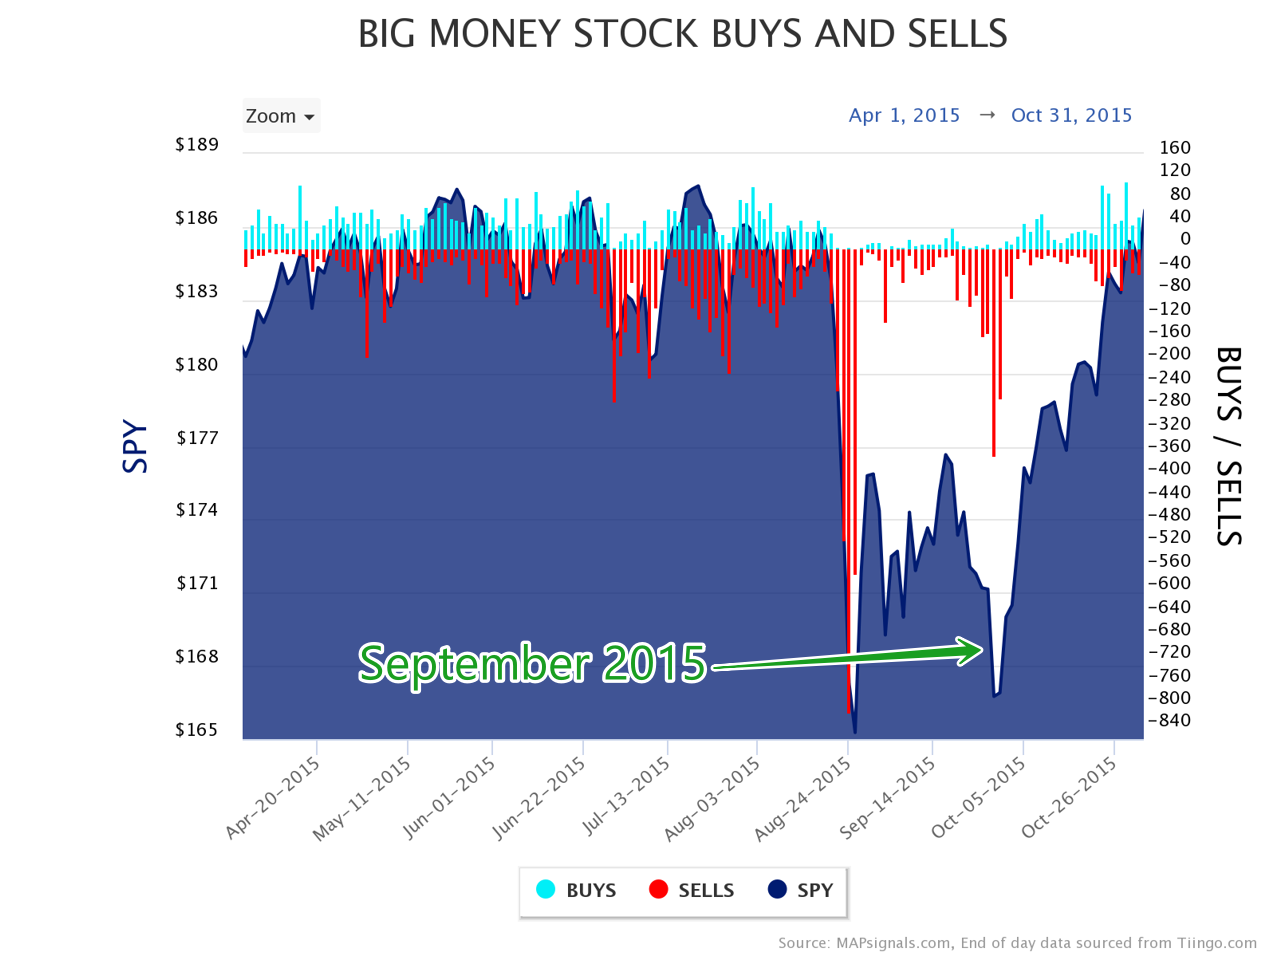 Big Money stock buys and sells | September 2015